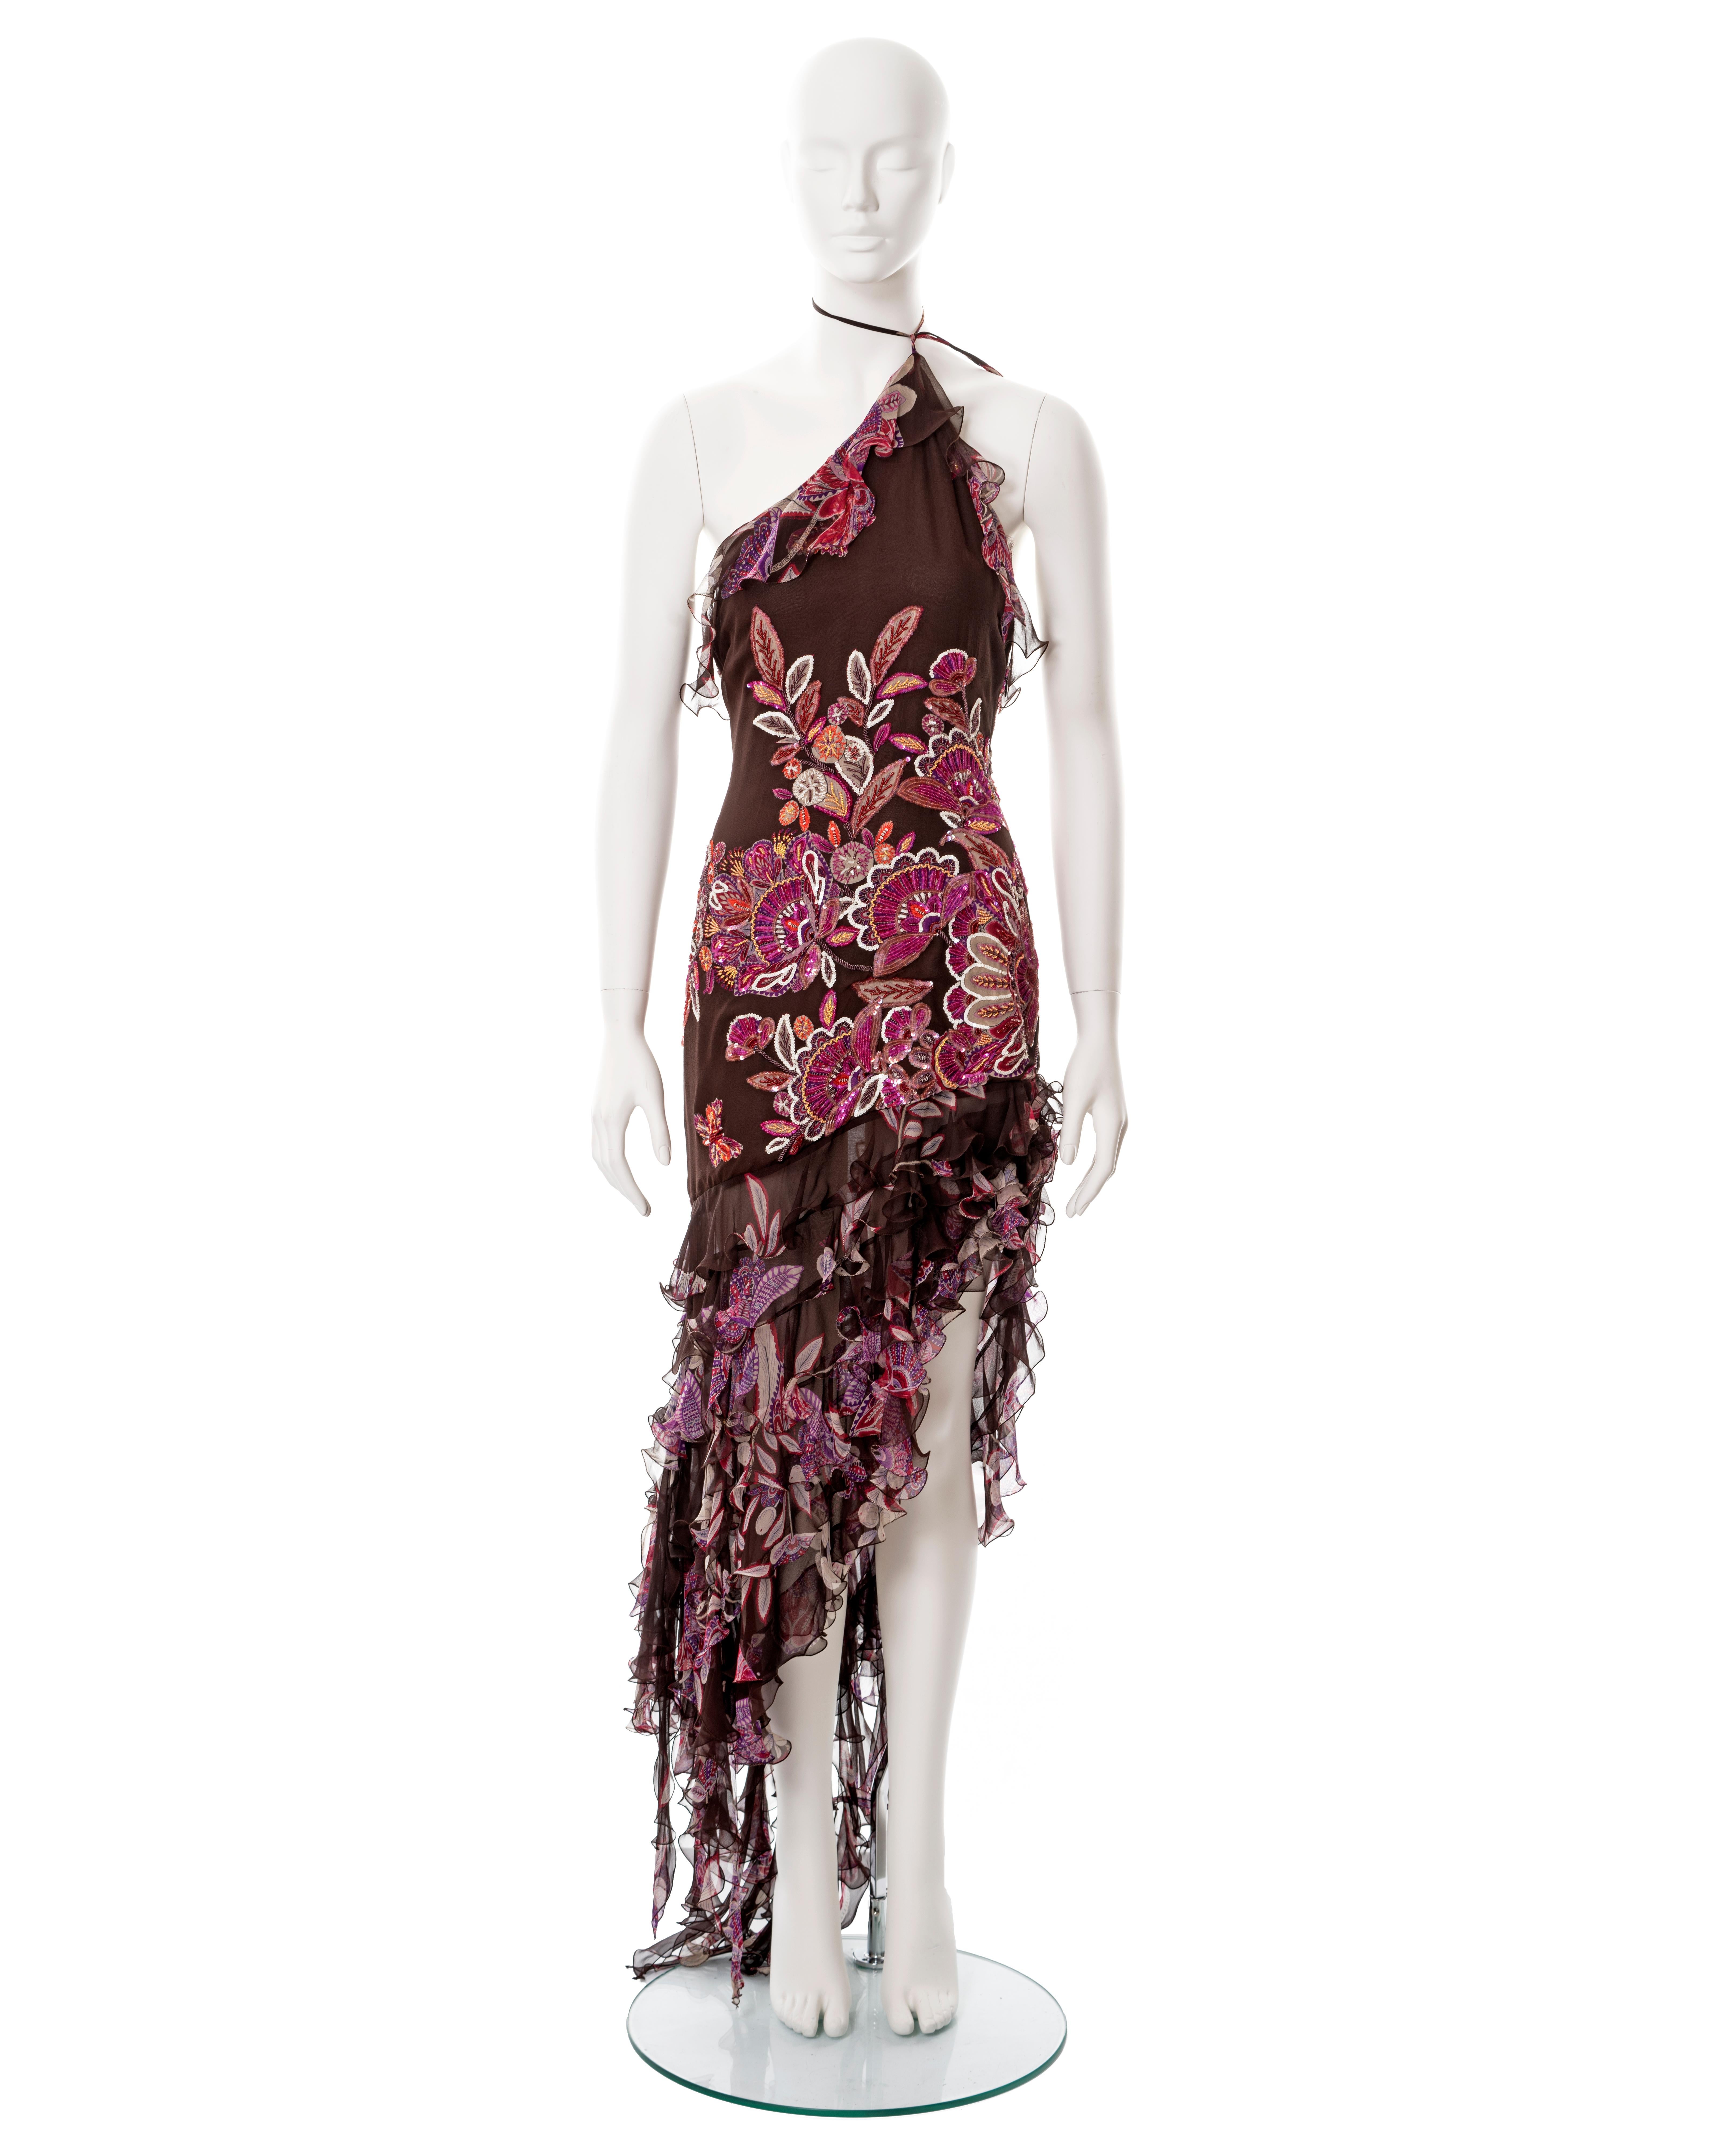 ▪ Emanuel Ungaro burgundy silk halter-neck evening dress
▪ Spring-Summer 2003
▪ Constructed from bias-cut burgundy silk chiffon 
▪ Floral and butterfly motif embellished with beads and sequins 
▪ Ruffled chiffon high-low skirt with leg slit 
▪ FR 40